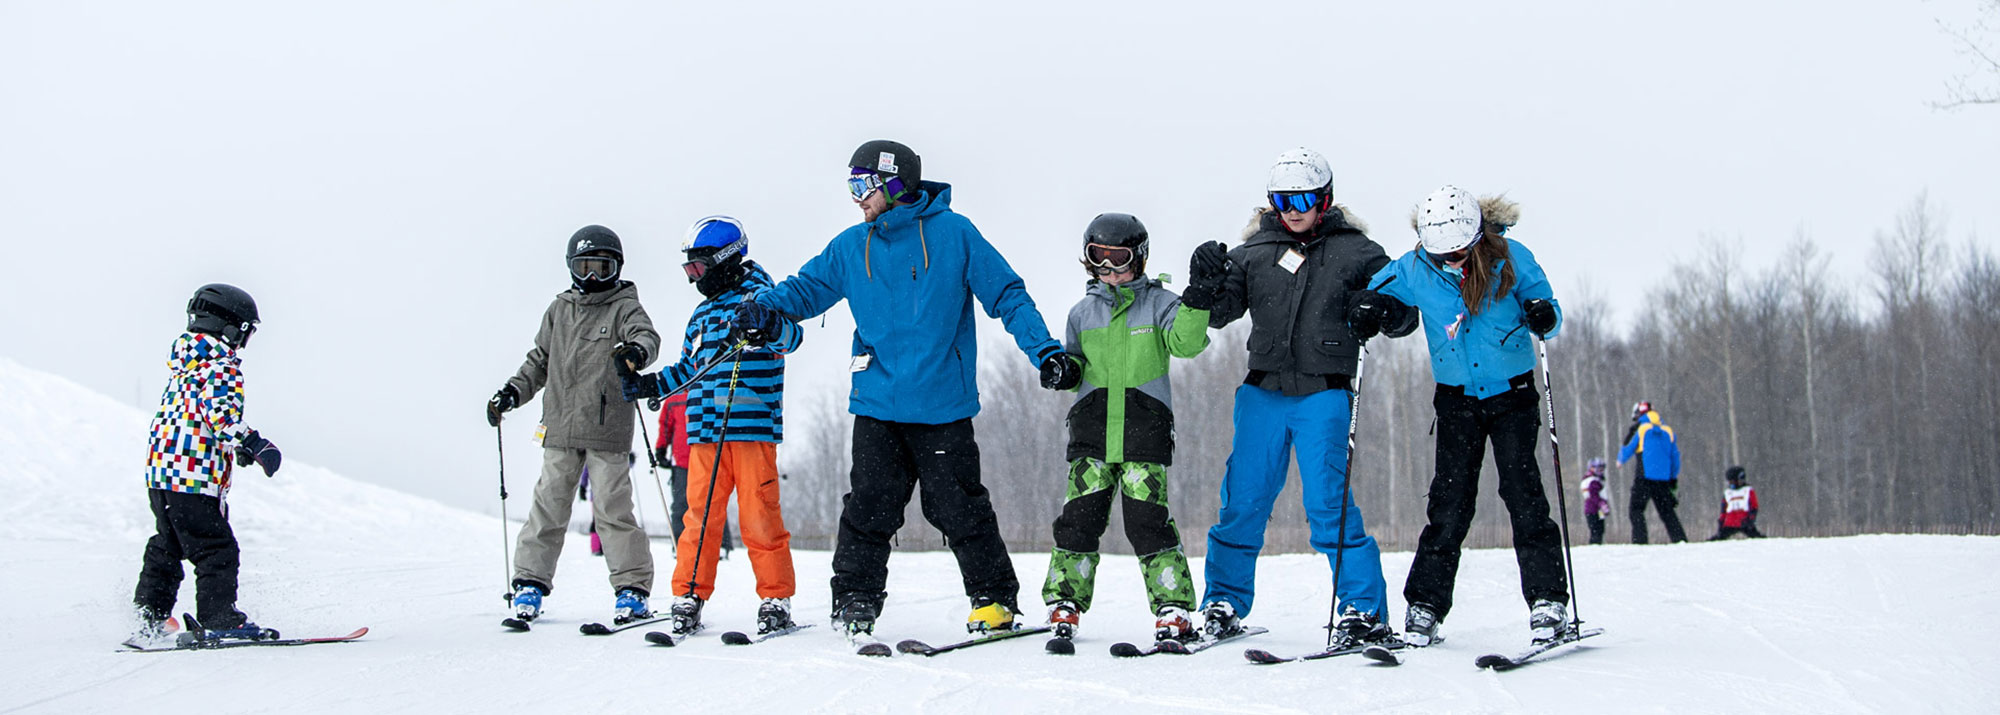 TIPS FOR ACTIVE KIDS THIS WINTER